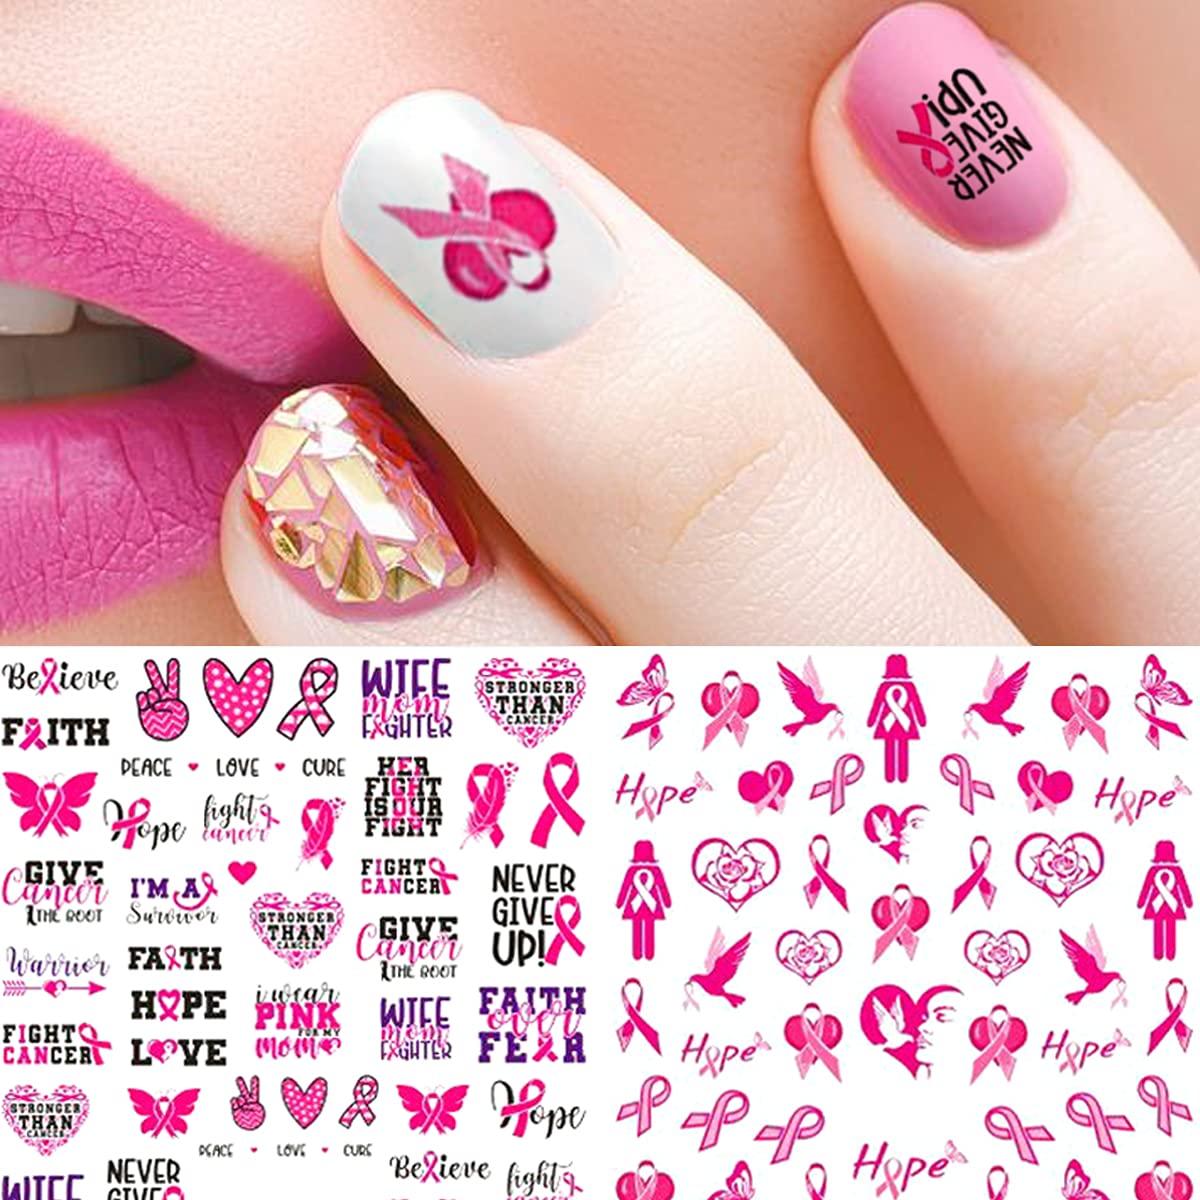  Breast Cancer Nail Art Stickers 3D Self-Adhesive Nail Decals  Pink Ribbon Nail Stickers Nail Art Supplies Heart Breast Cancer Awareness Nail  Designs for Nail Art Decoration DIY Manicure Tips 6 Sheets 